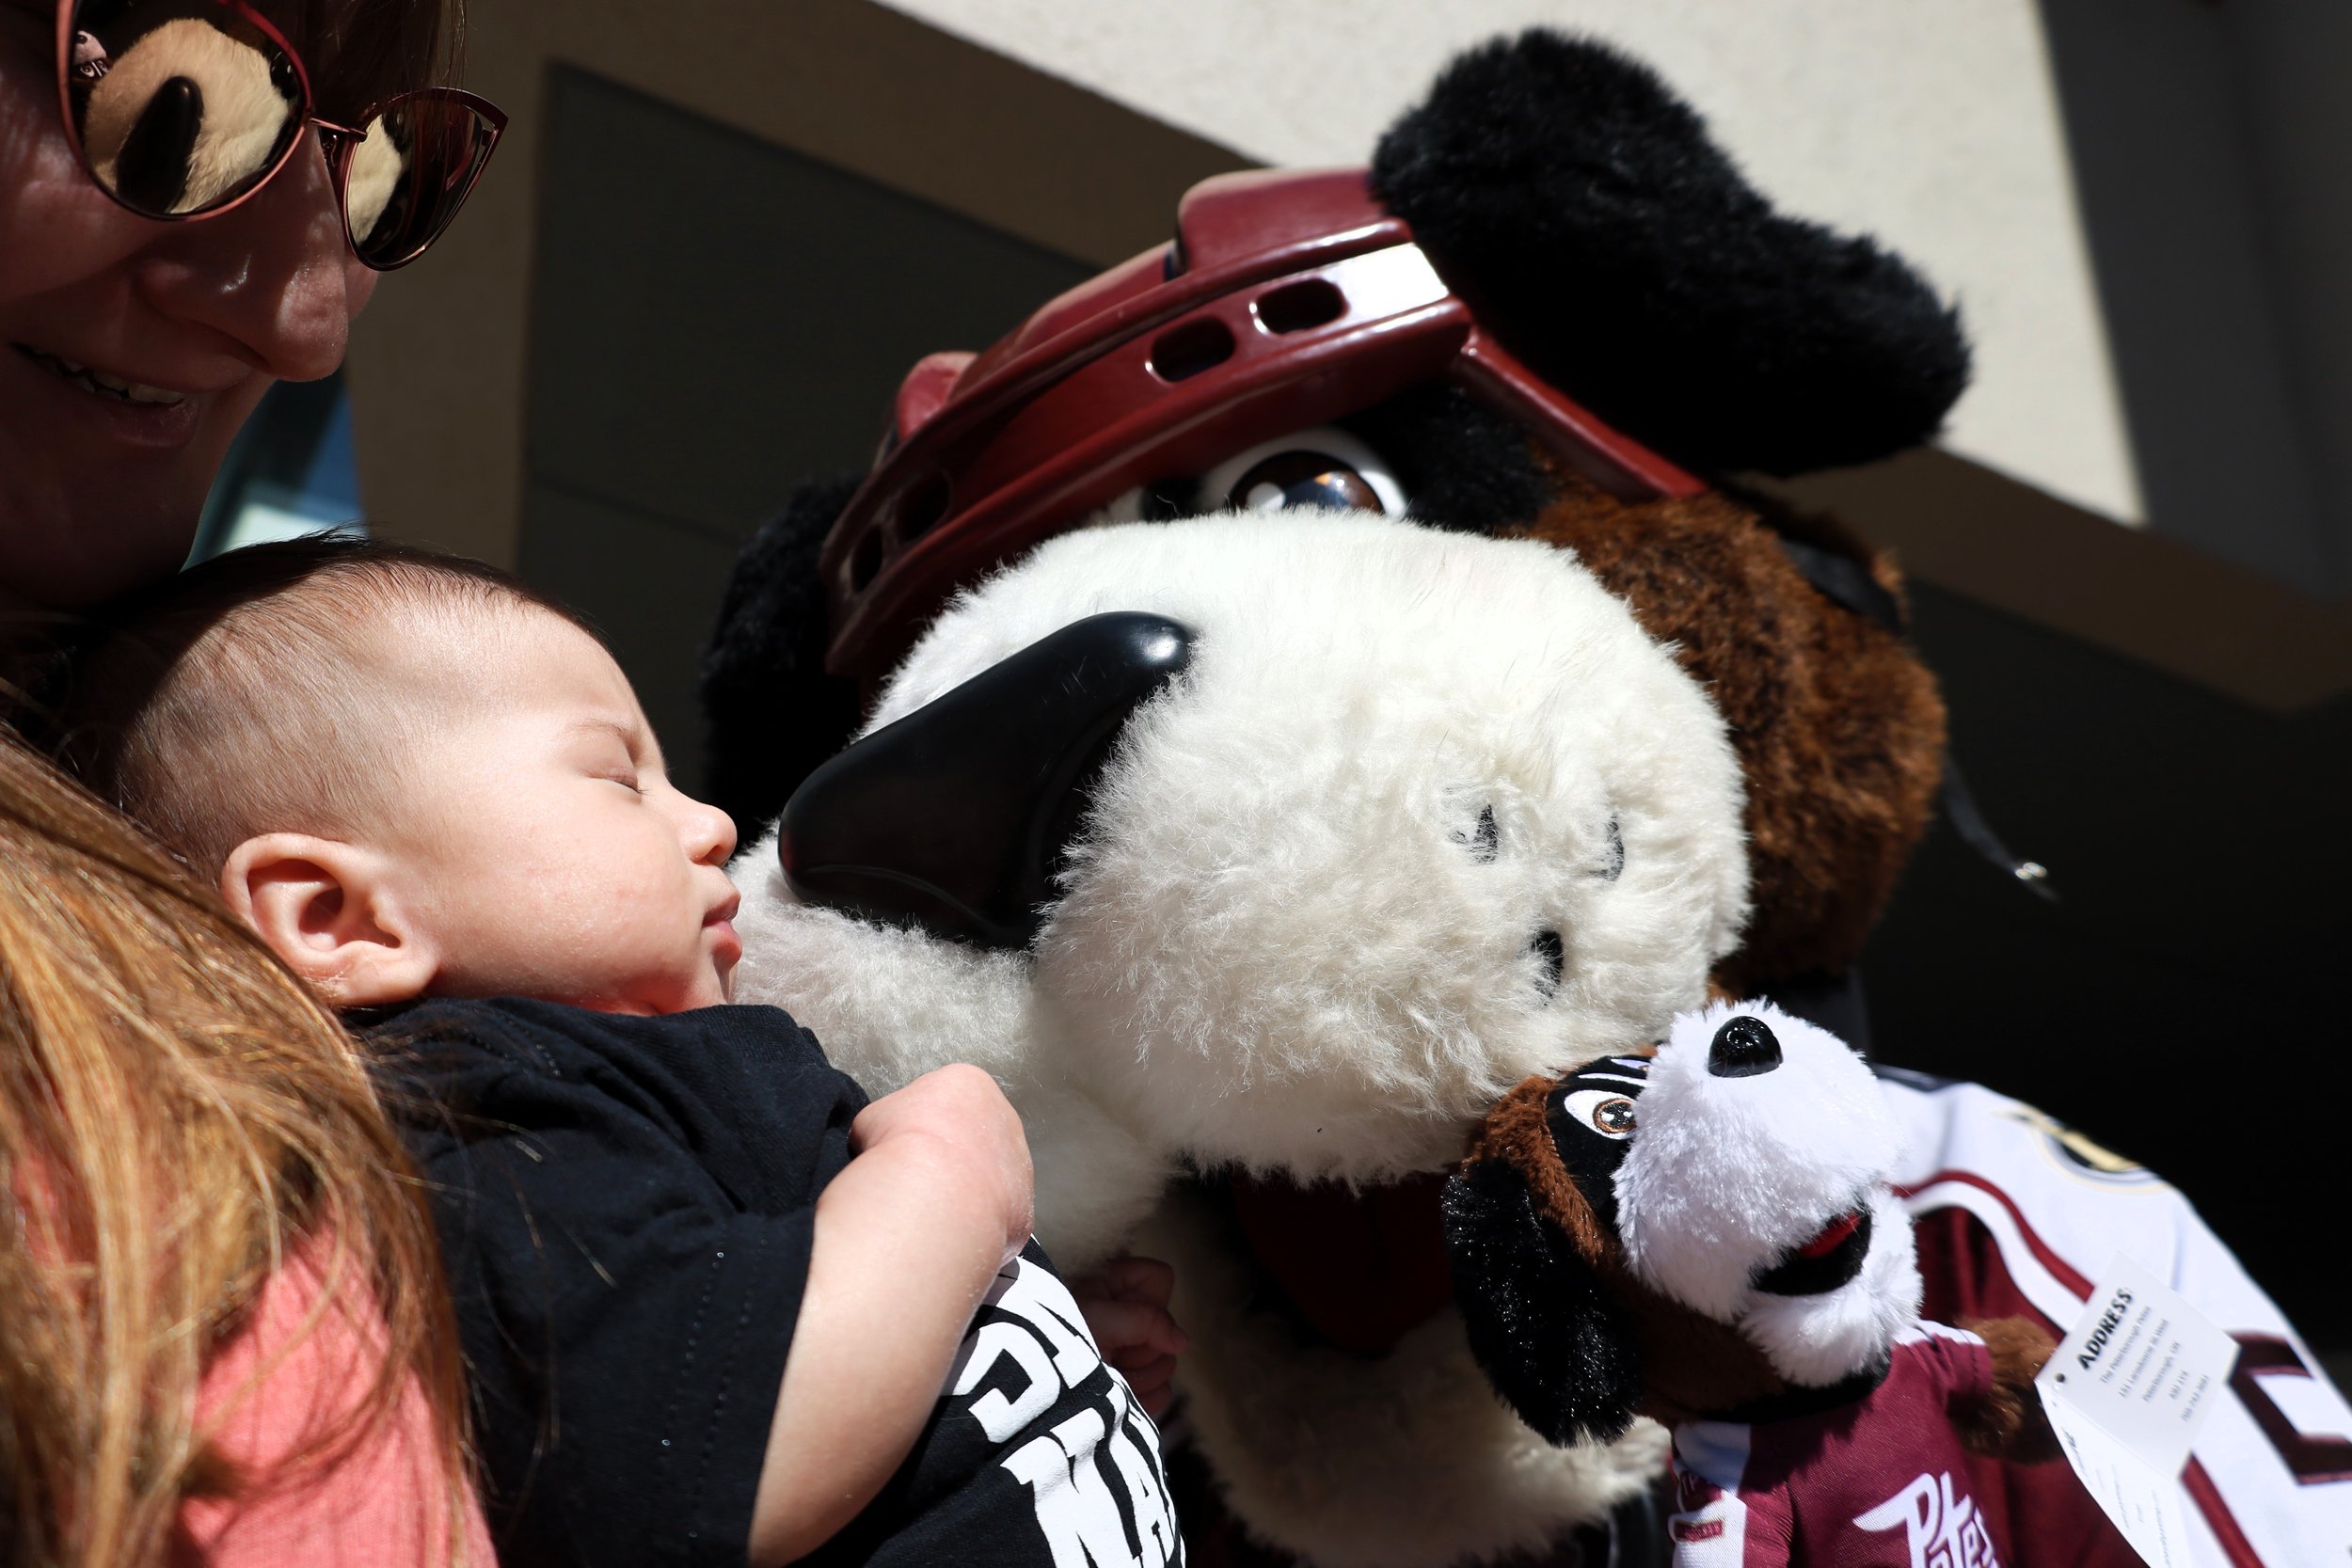 Roger meeting a young first-time Petes Fan. All photos by David Tuan Bui.